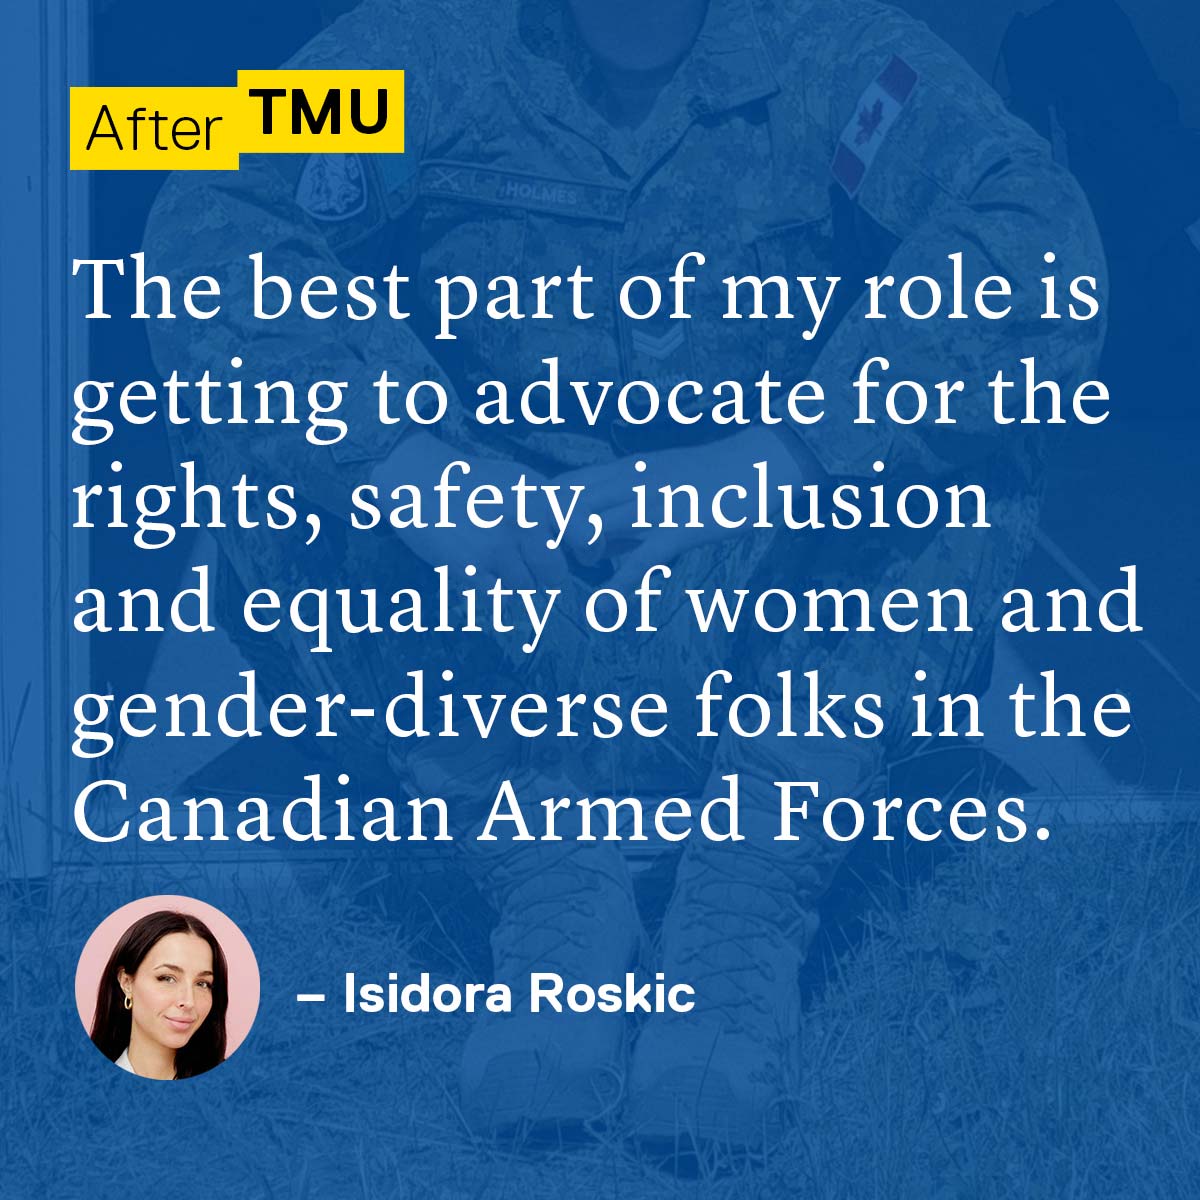 The best part of my role is getting to advocate for the rights, safety, inclusion and equality of women and gender-diverse folks in the Canadian Armed Forces. - Isidora Roskic